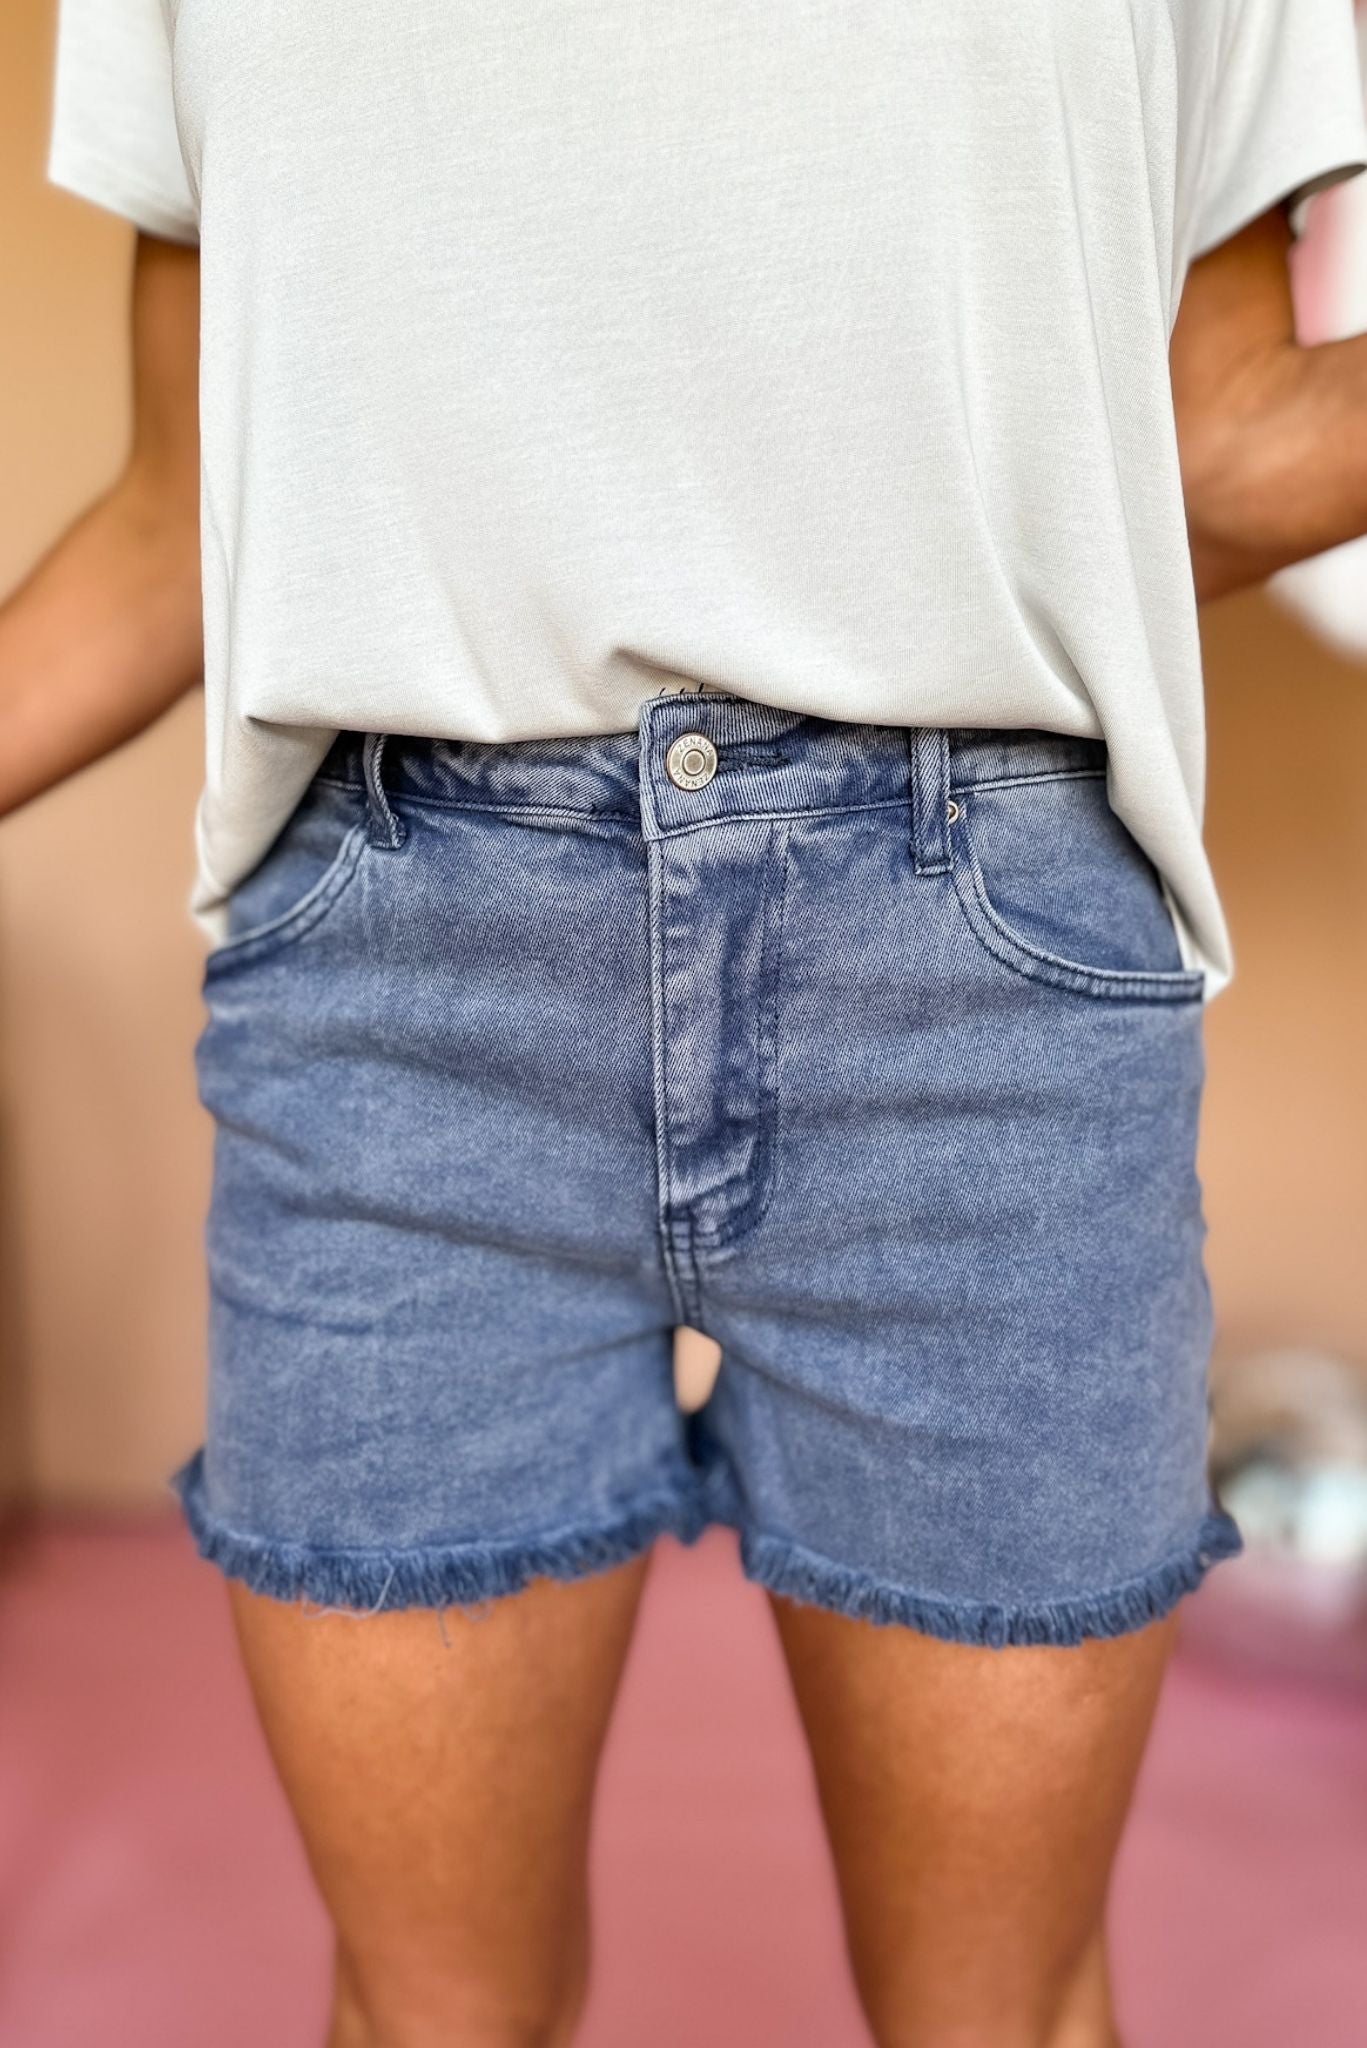 Load image into Gallery viewer, Blue Raw Hem Denim Shorts, Denim Shorts, Raw Hem Shorts, Summer Shorts, Summer Style, Mom Style, Shop Style Your Senses by Mallory Fitzsimmons
